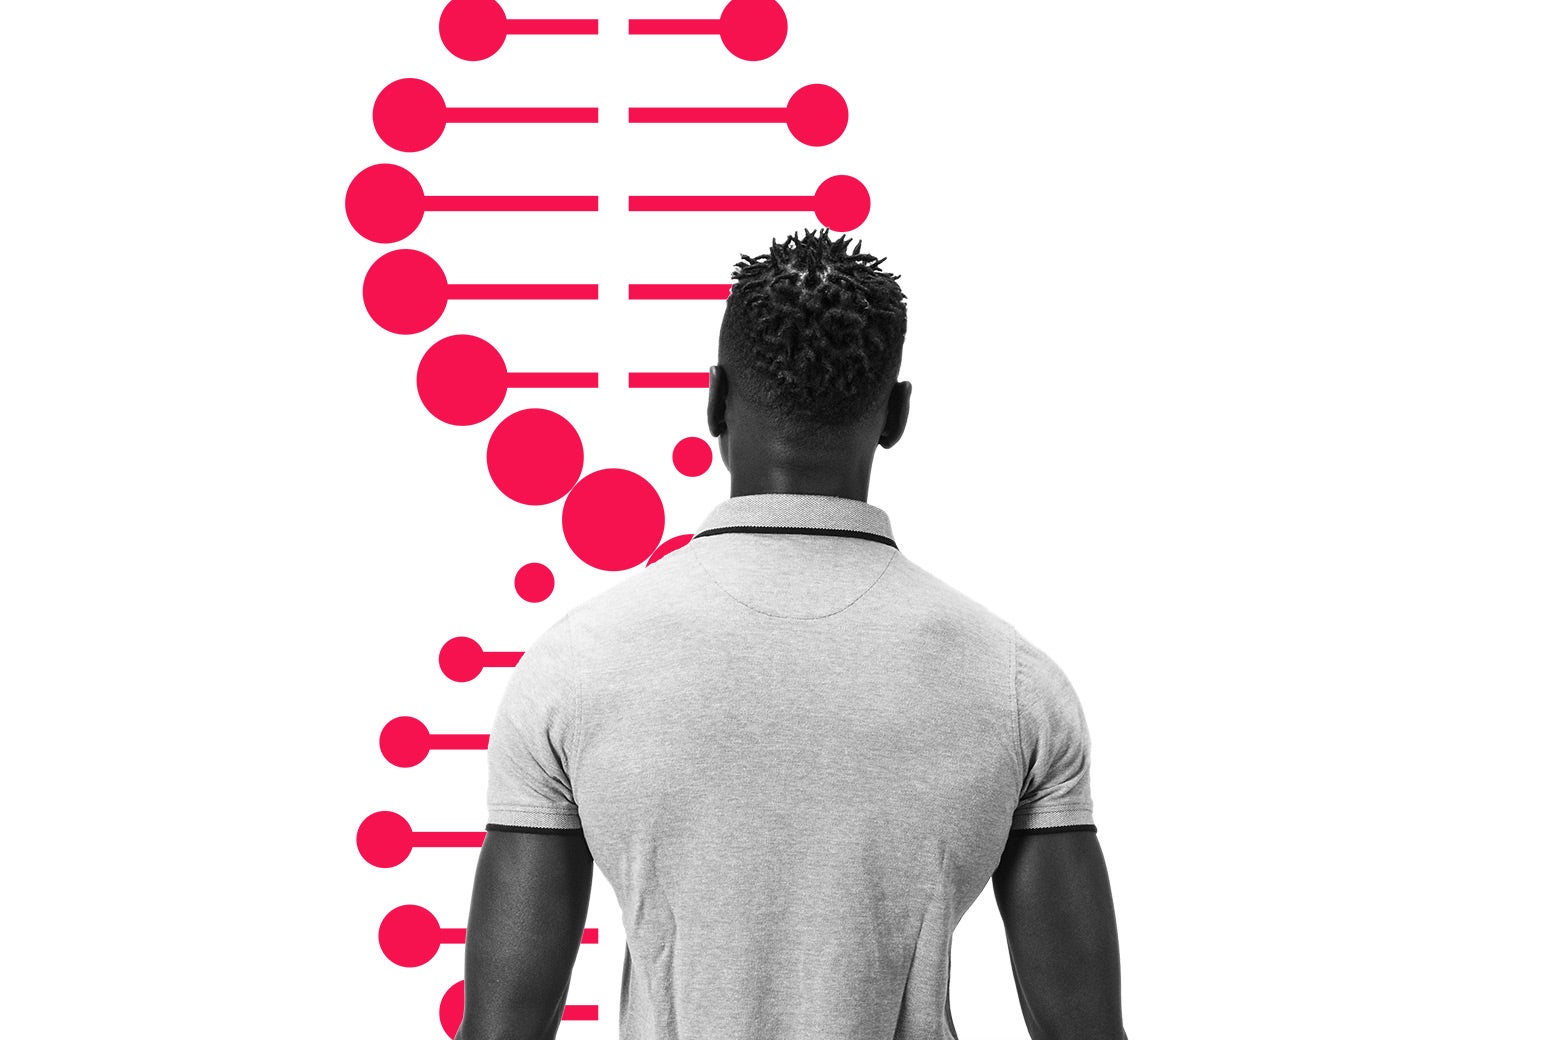 The back of a young man with a DNA strand overlaid behind him.